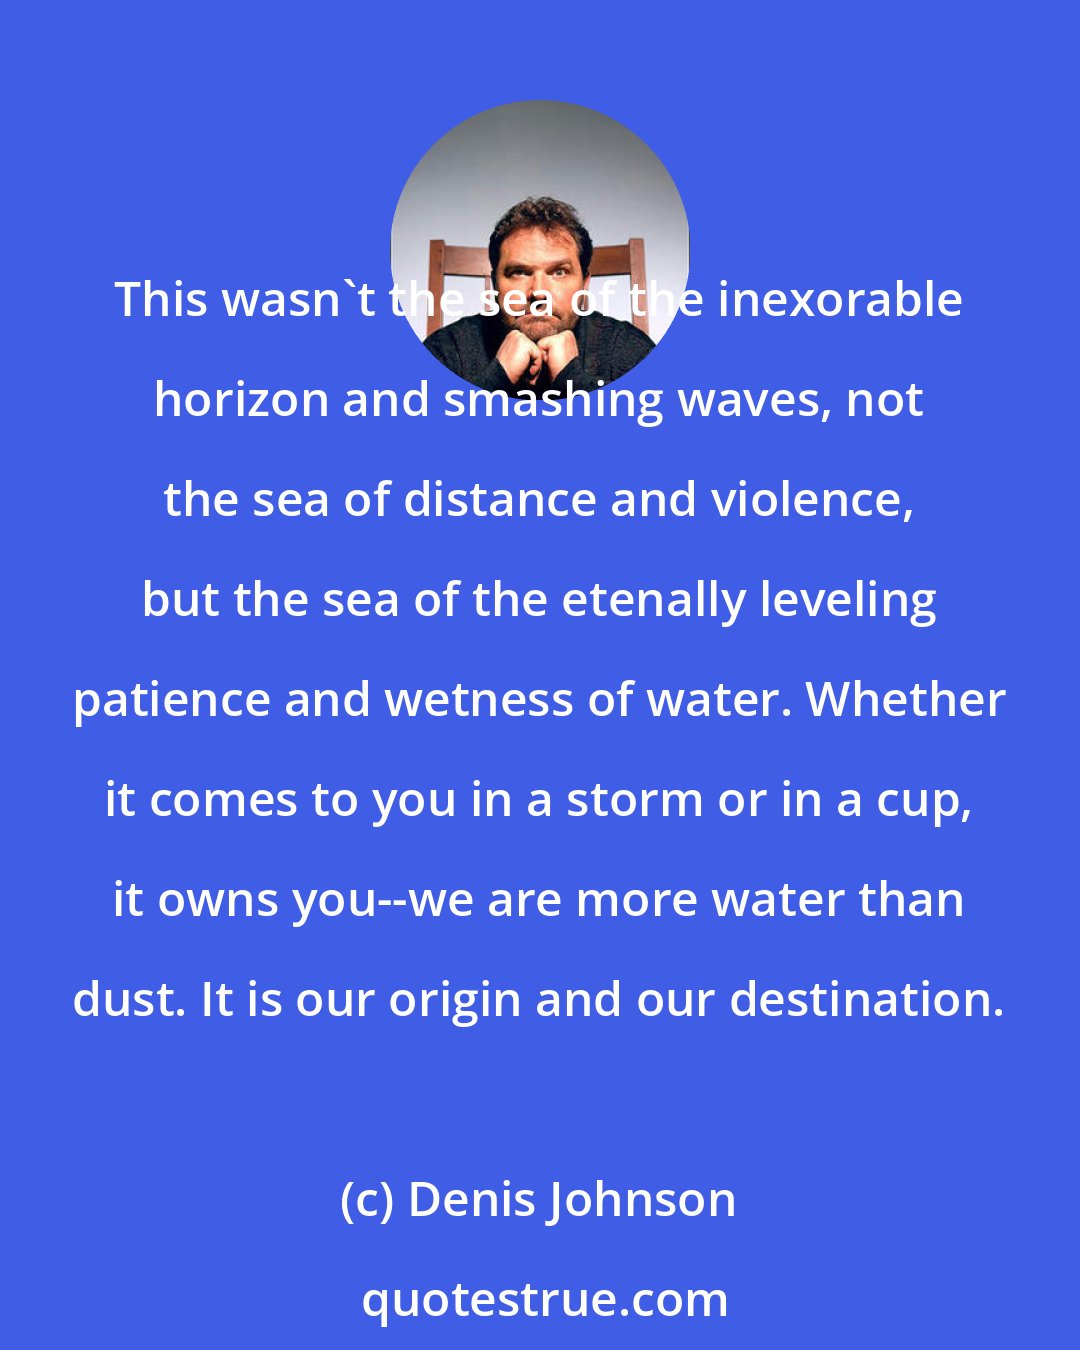 Denis Johnson: This wasn't the sea of the inexorable horizon and smashing waves, not the sea of distance and violence, but the sea of the etenally leveling patience and wetness of water. Whether it comes to you in a storm or in a cup, it owns you--we are more water than dust. It is our origin and our destination.